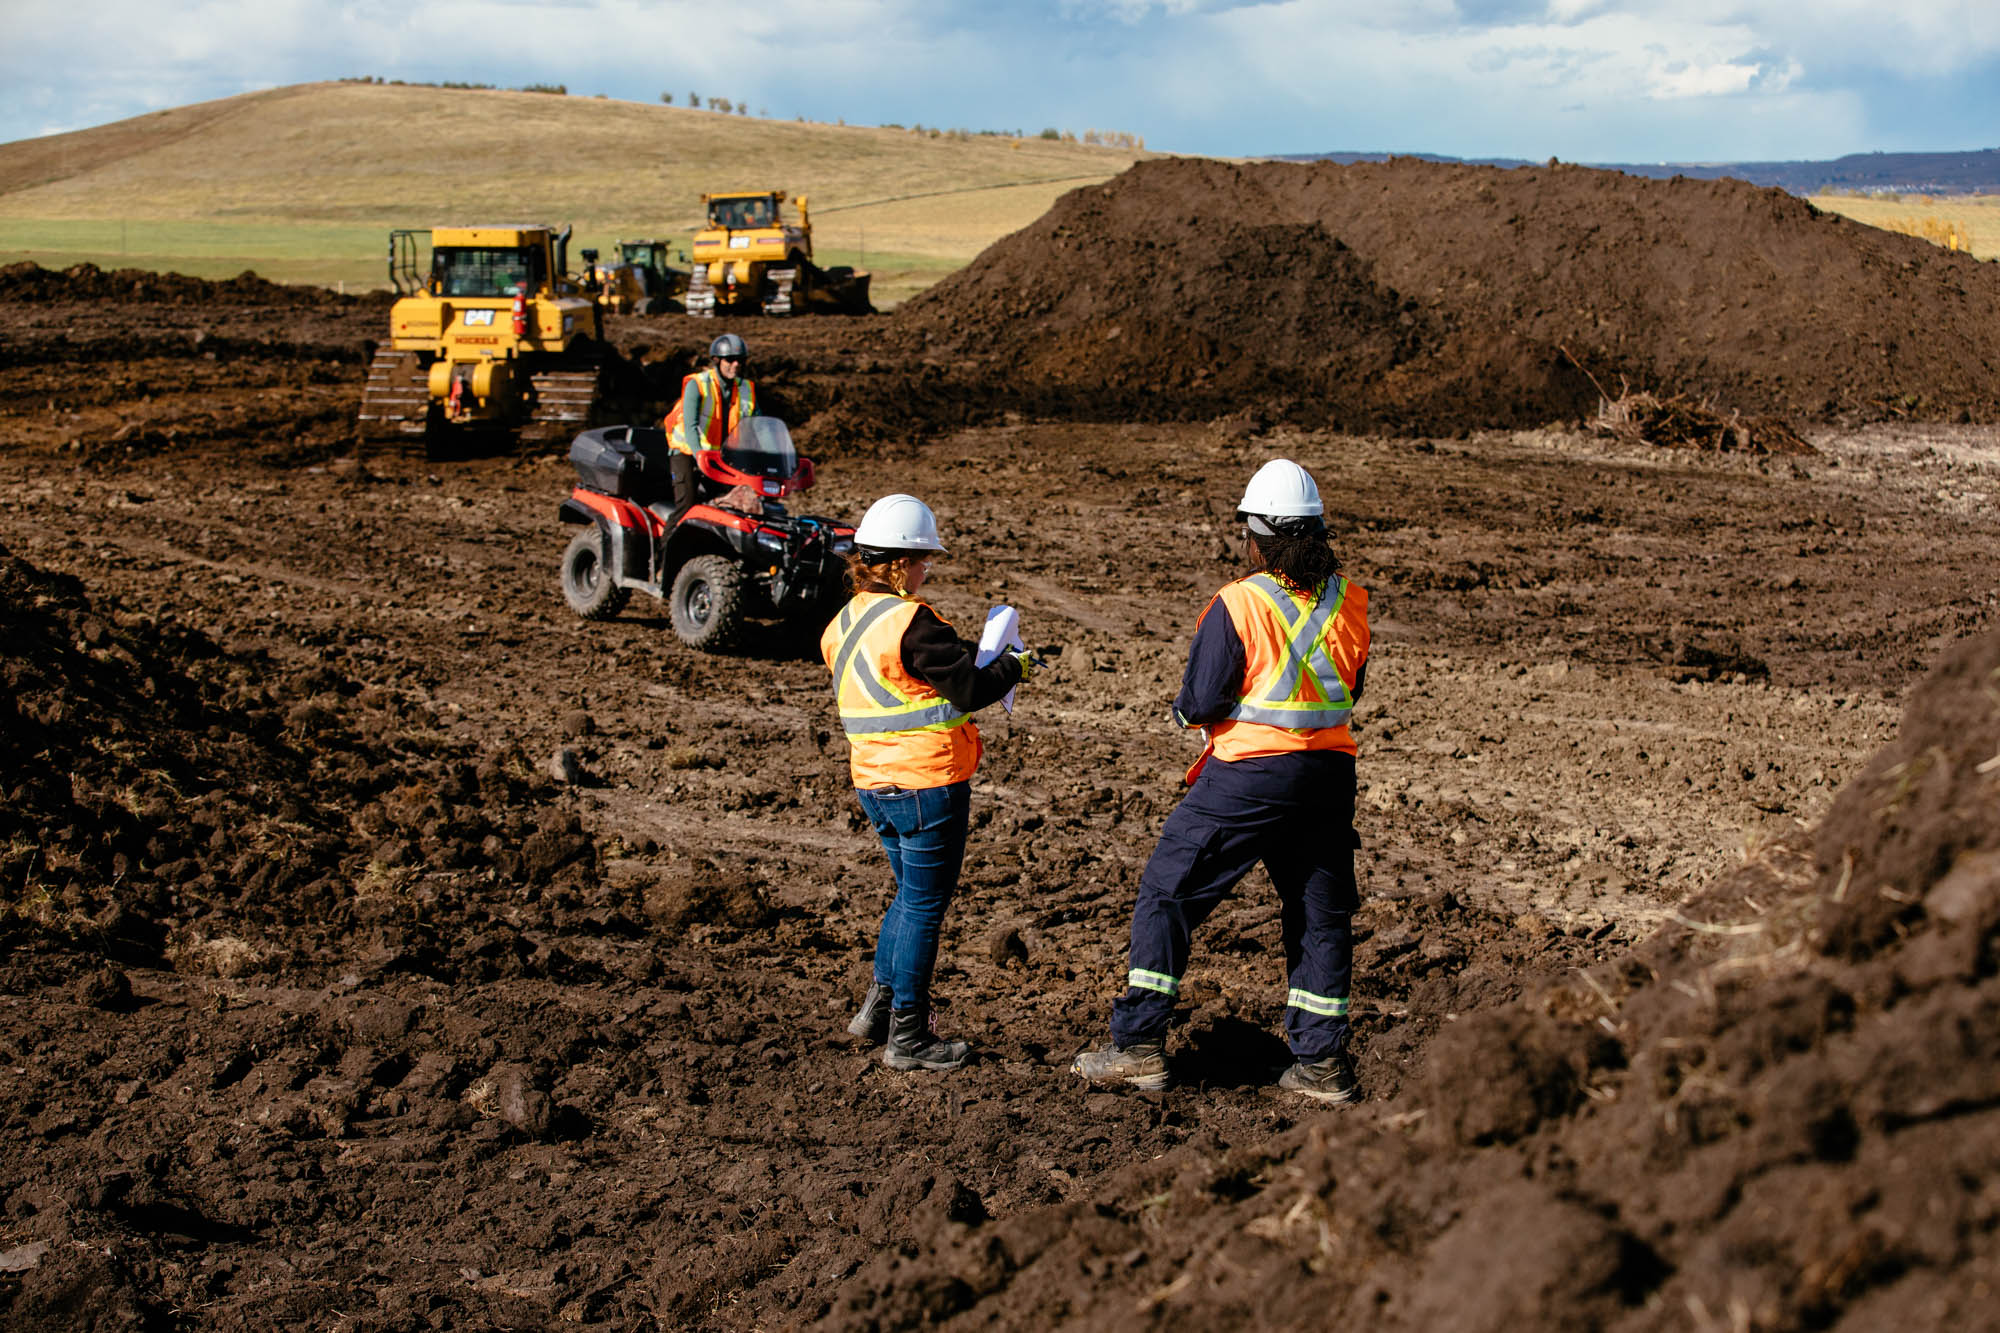 Two CER Inspection Officers on construction site, with worker on ATV and heavy equipment and dirt in the background.